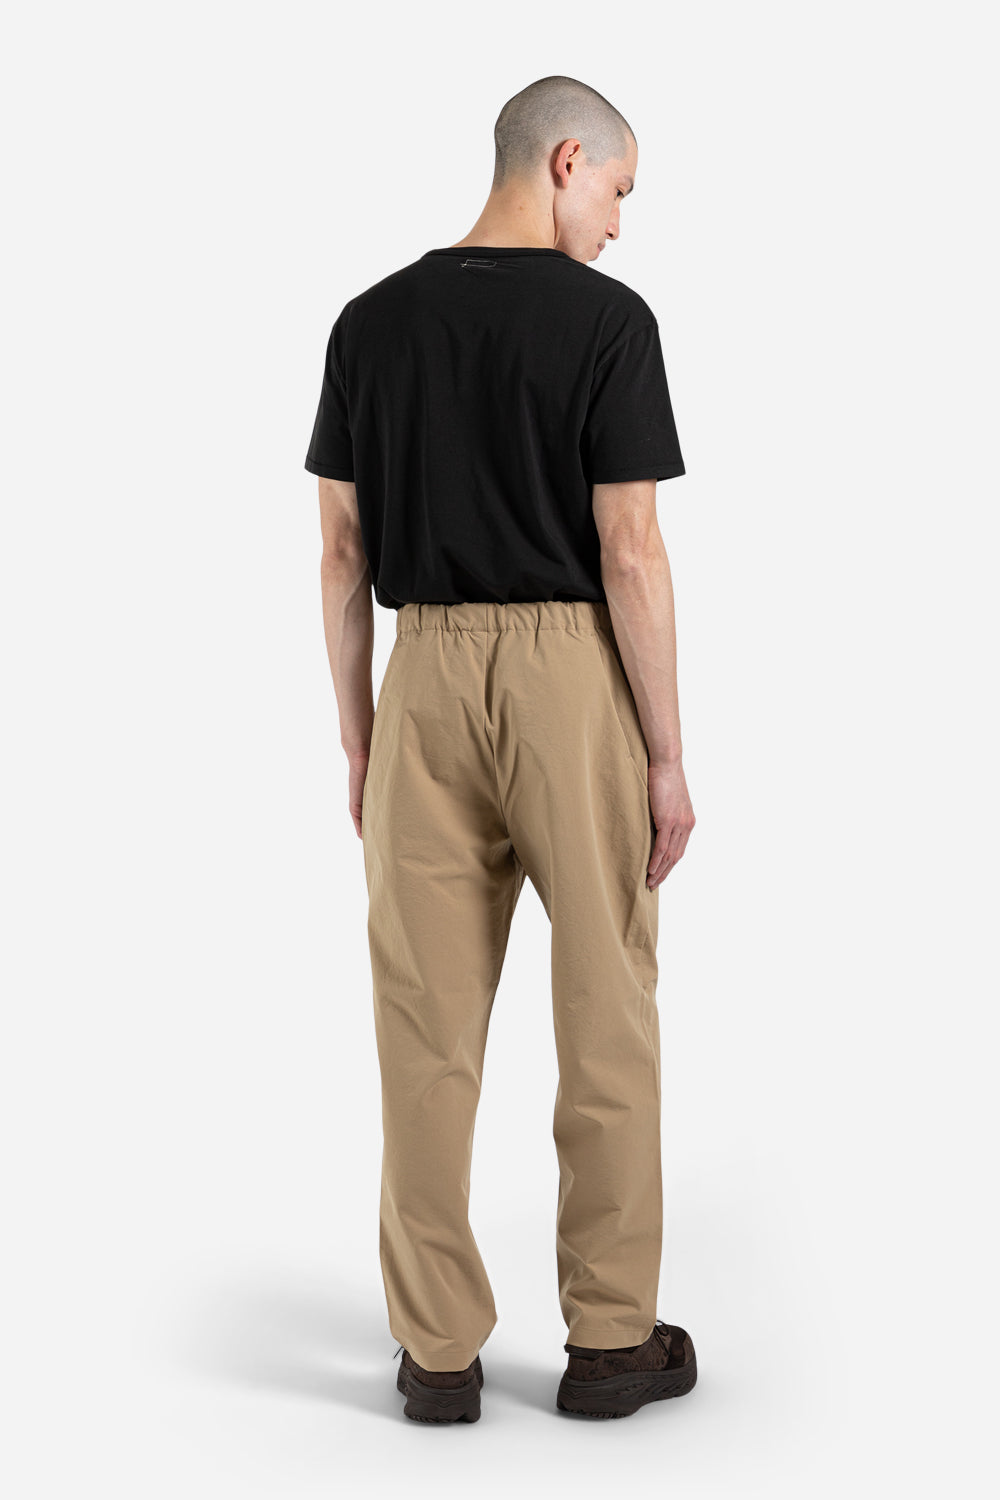 goldwin-one-tuck-tapered-stretch-pants